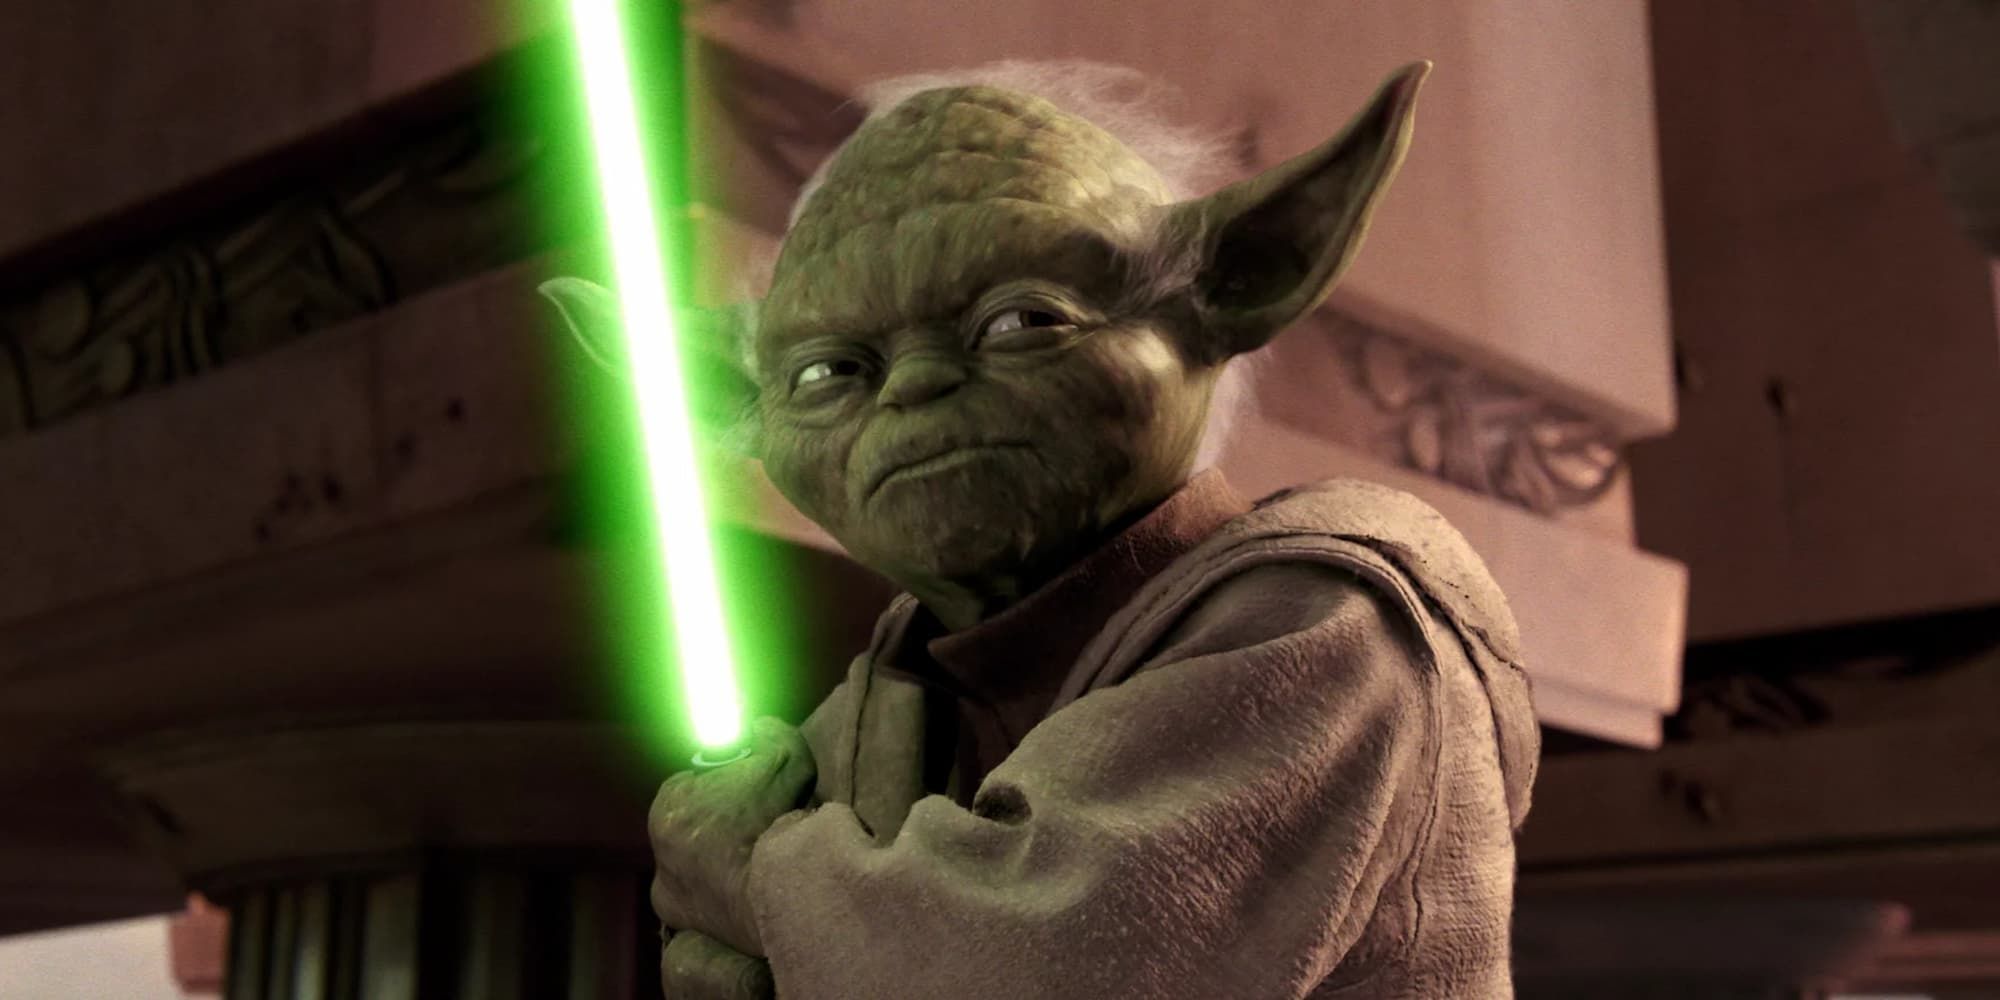 Yoda holds his green lightsaber in Star Wars: Revenge of the Sith after defeating several clone troopers.